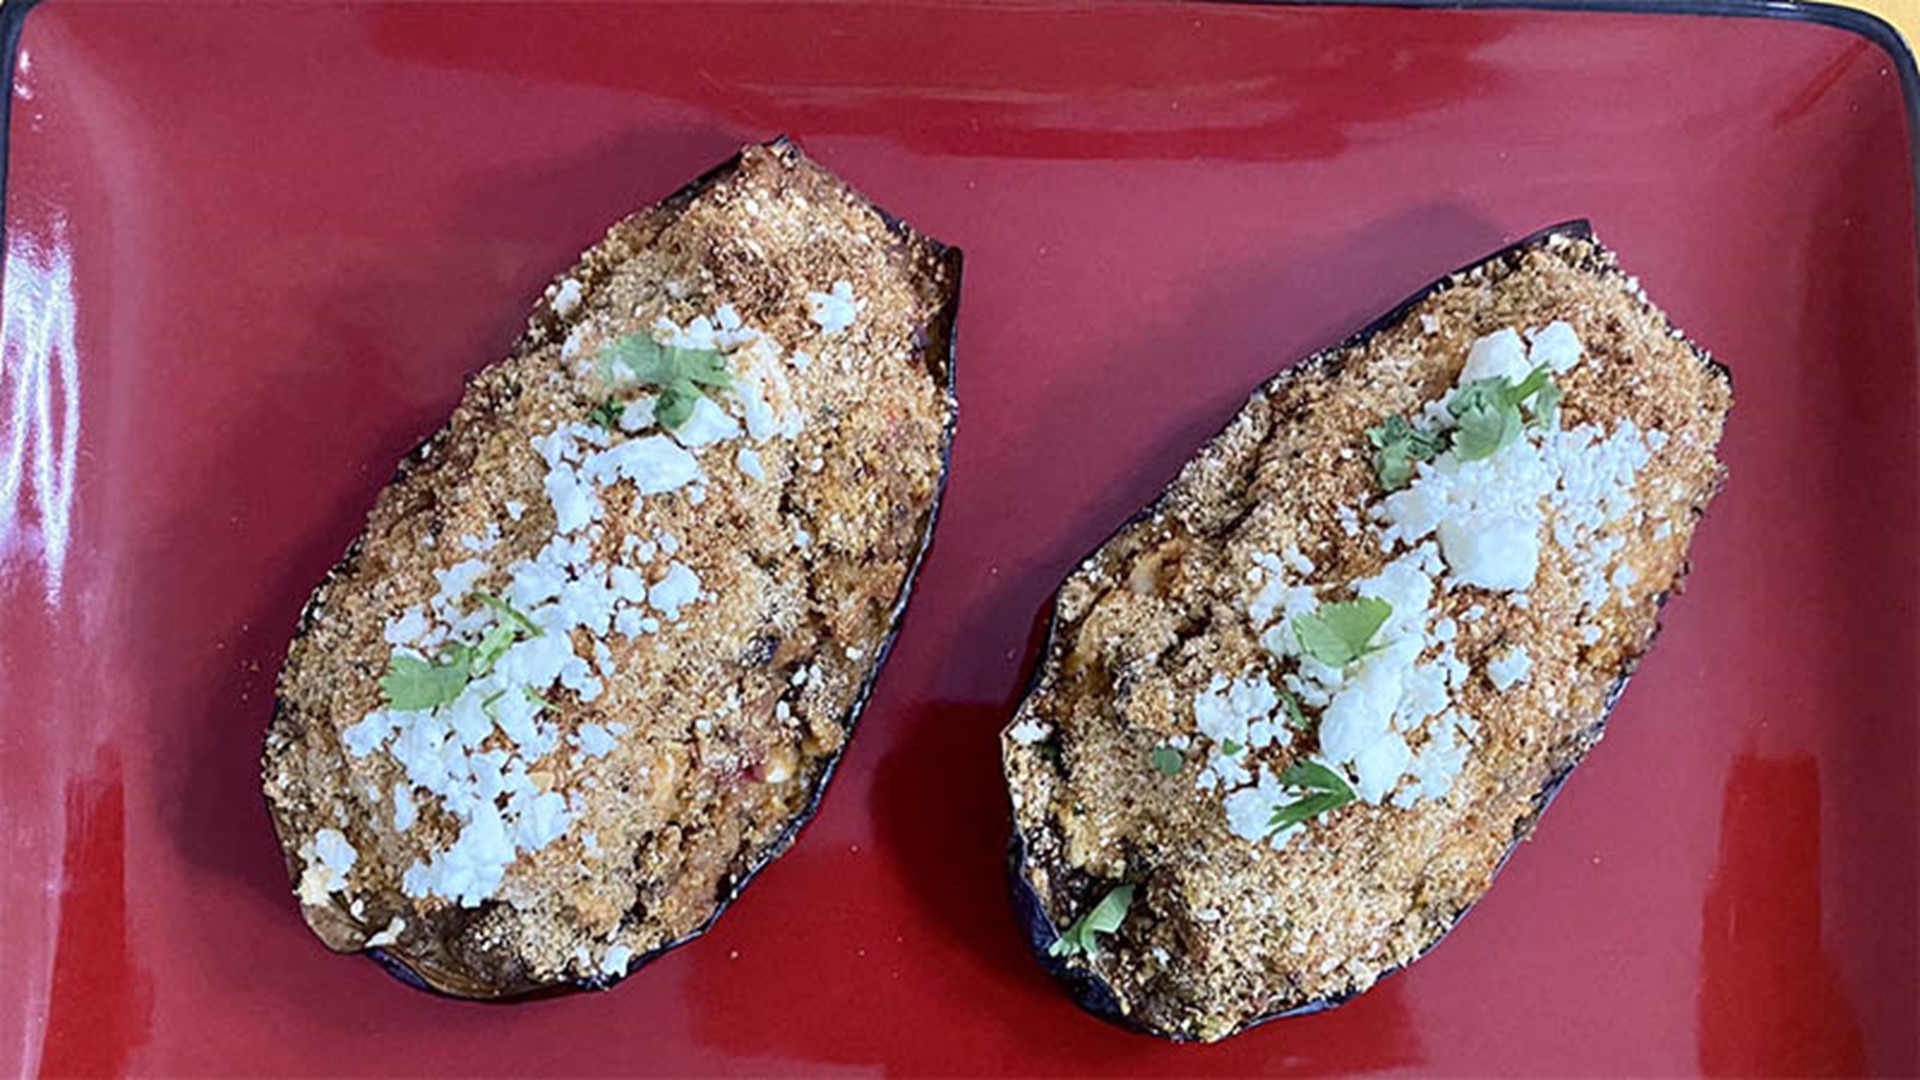 Chef Kevin Belton is showing us how to spice things up with some Spicy sausage stuffed eggplants.